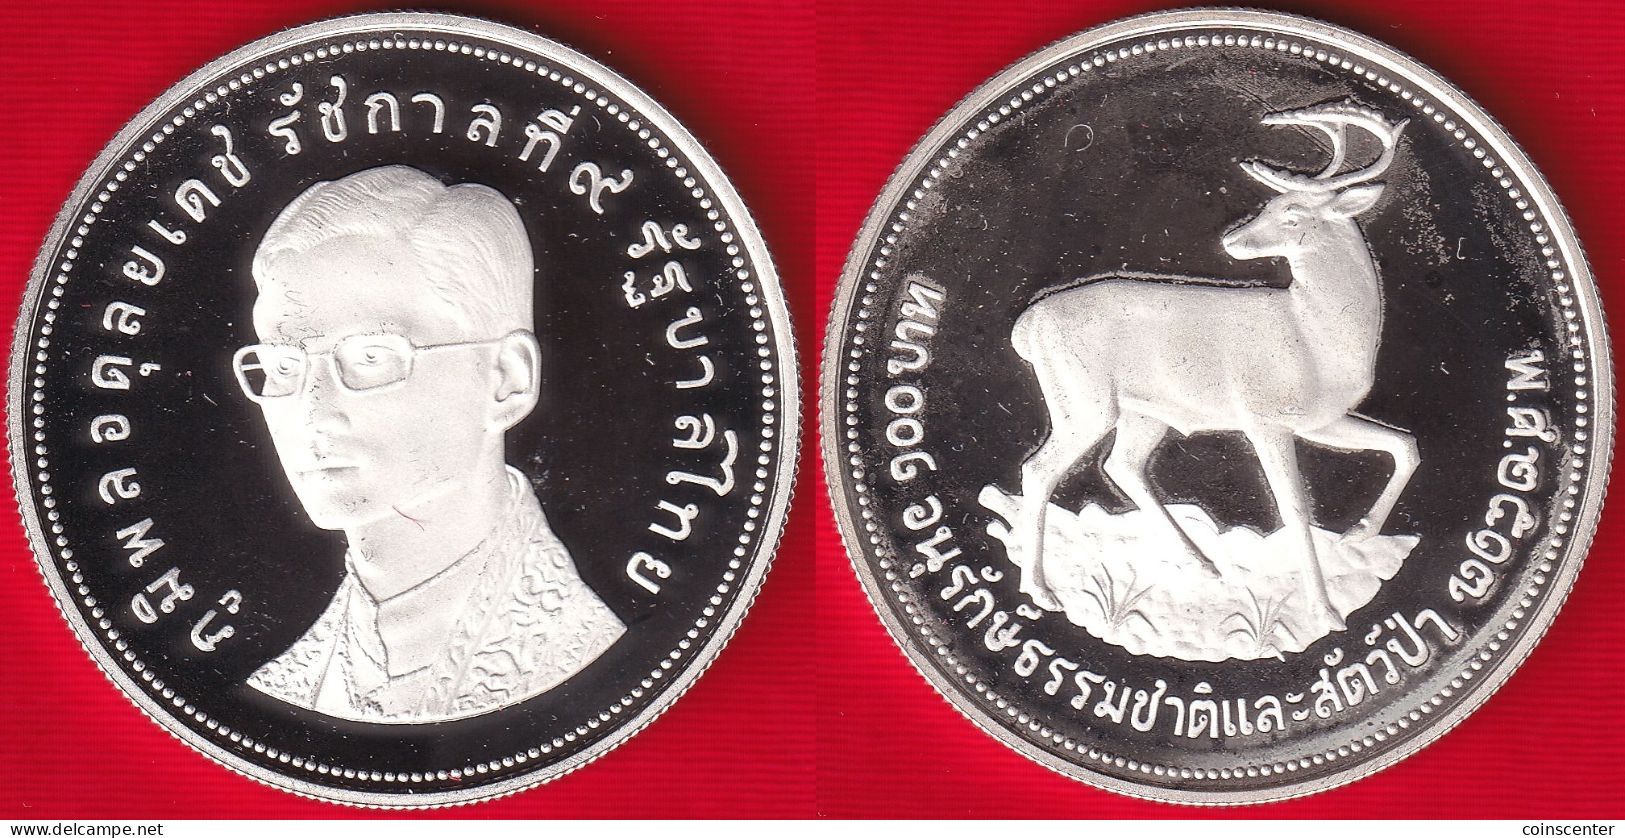 Thailand 100 Baht 1974 "Deer" Y#103a AG Silver PROOF - Tailandia